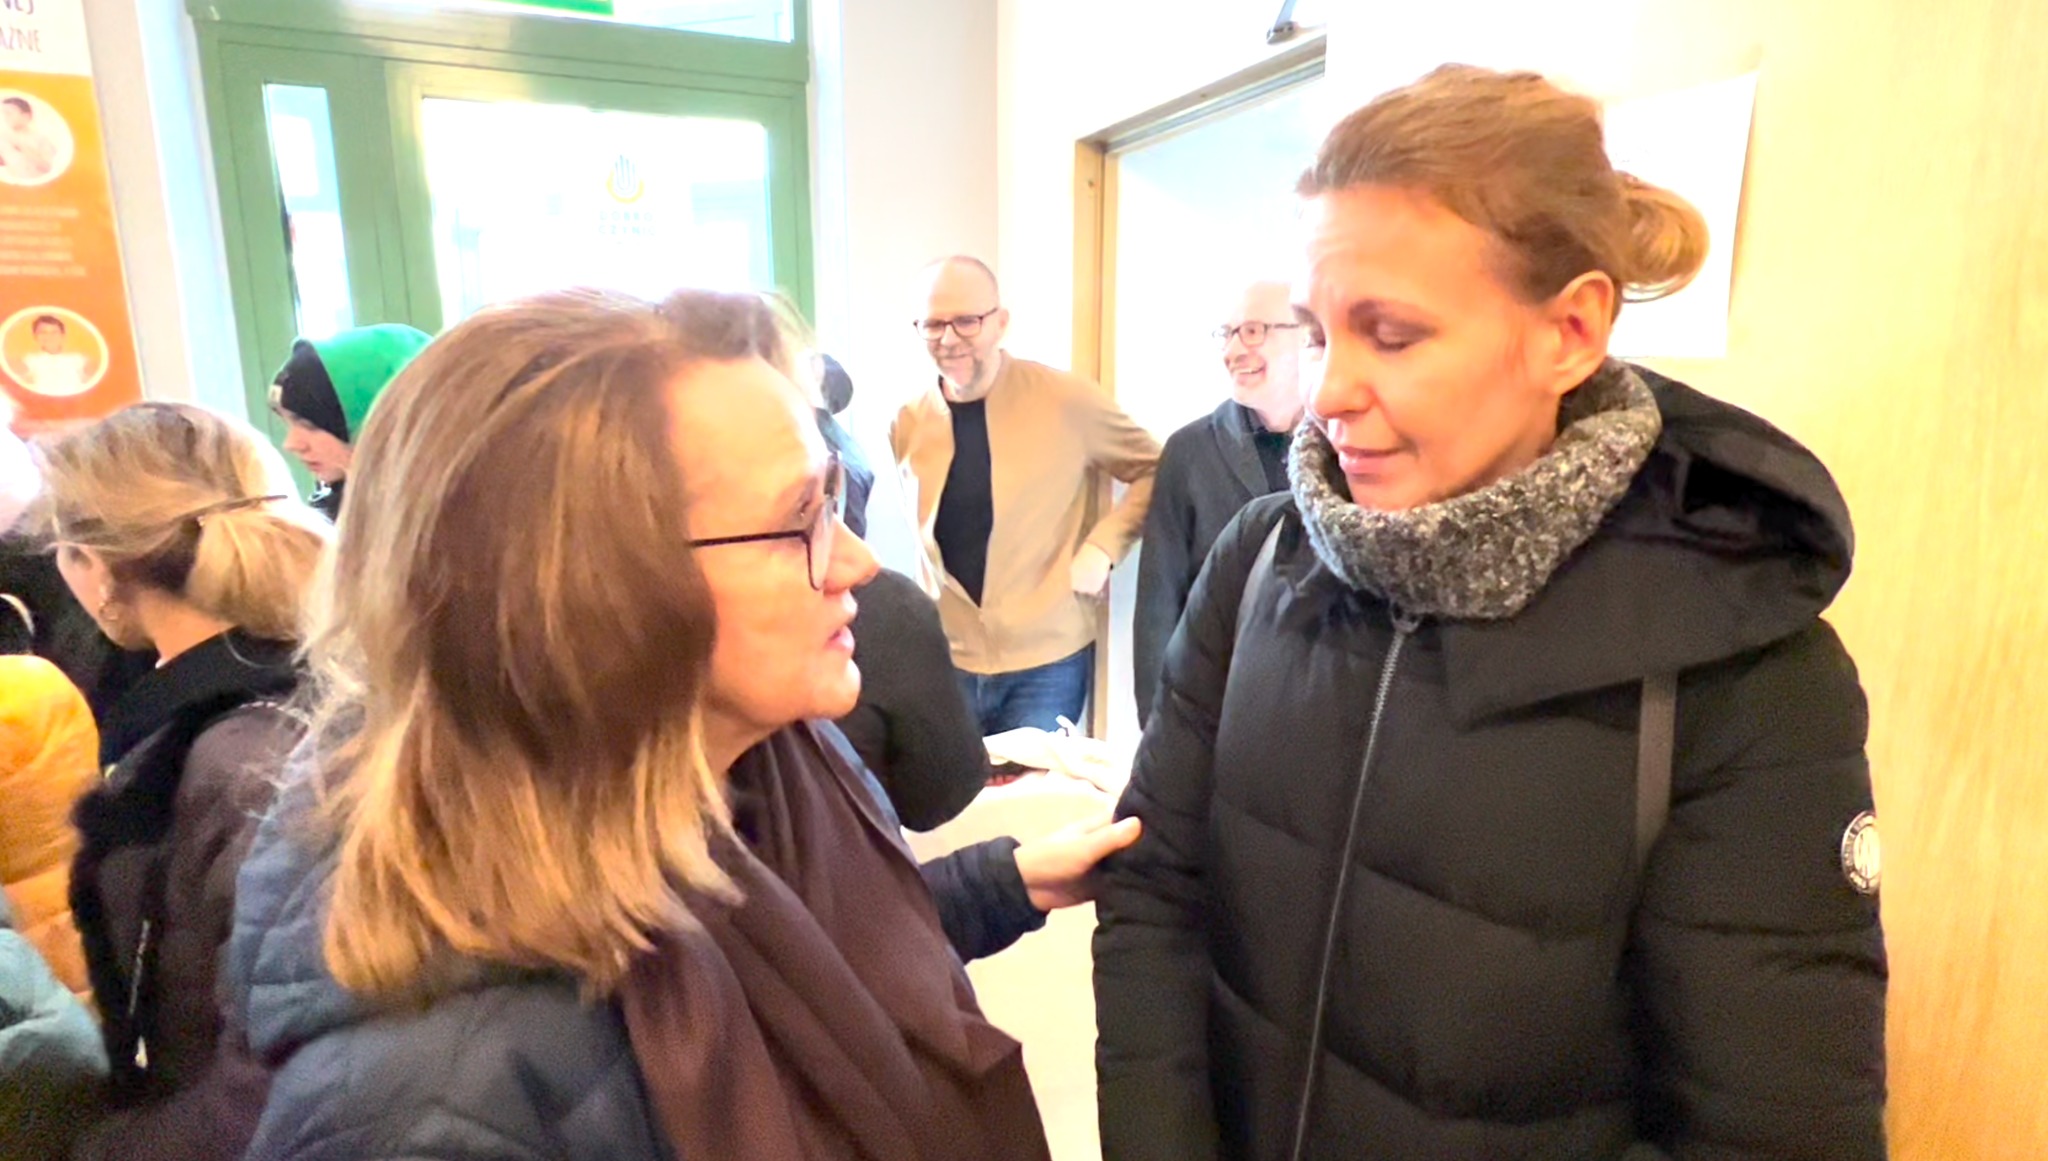 Laura is speaking with a Ukrainian mother at the center. Her husband has remained at the front. His recommendation, was for her to continue her journey to Canada if it was possible to do so. She is traveling with their 2 small children.